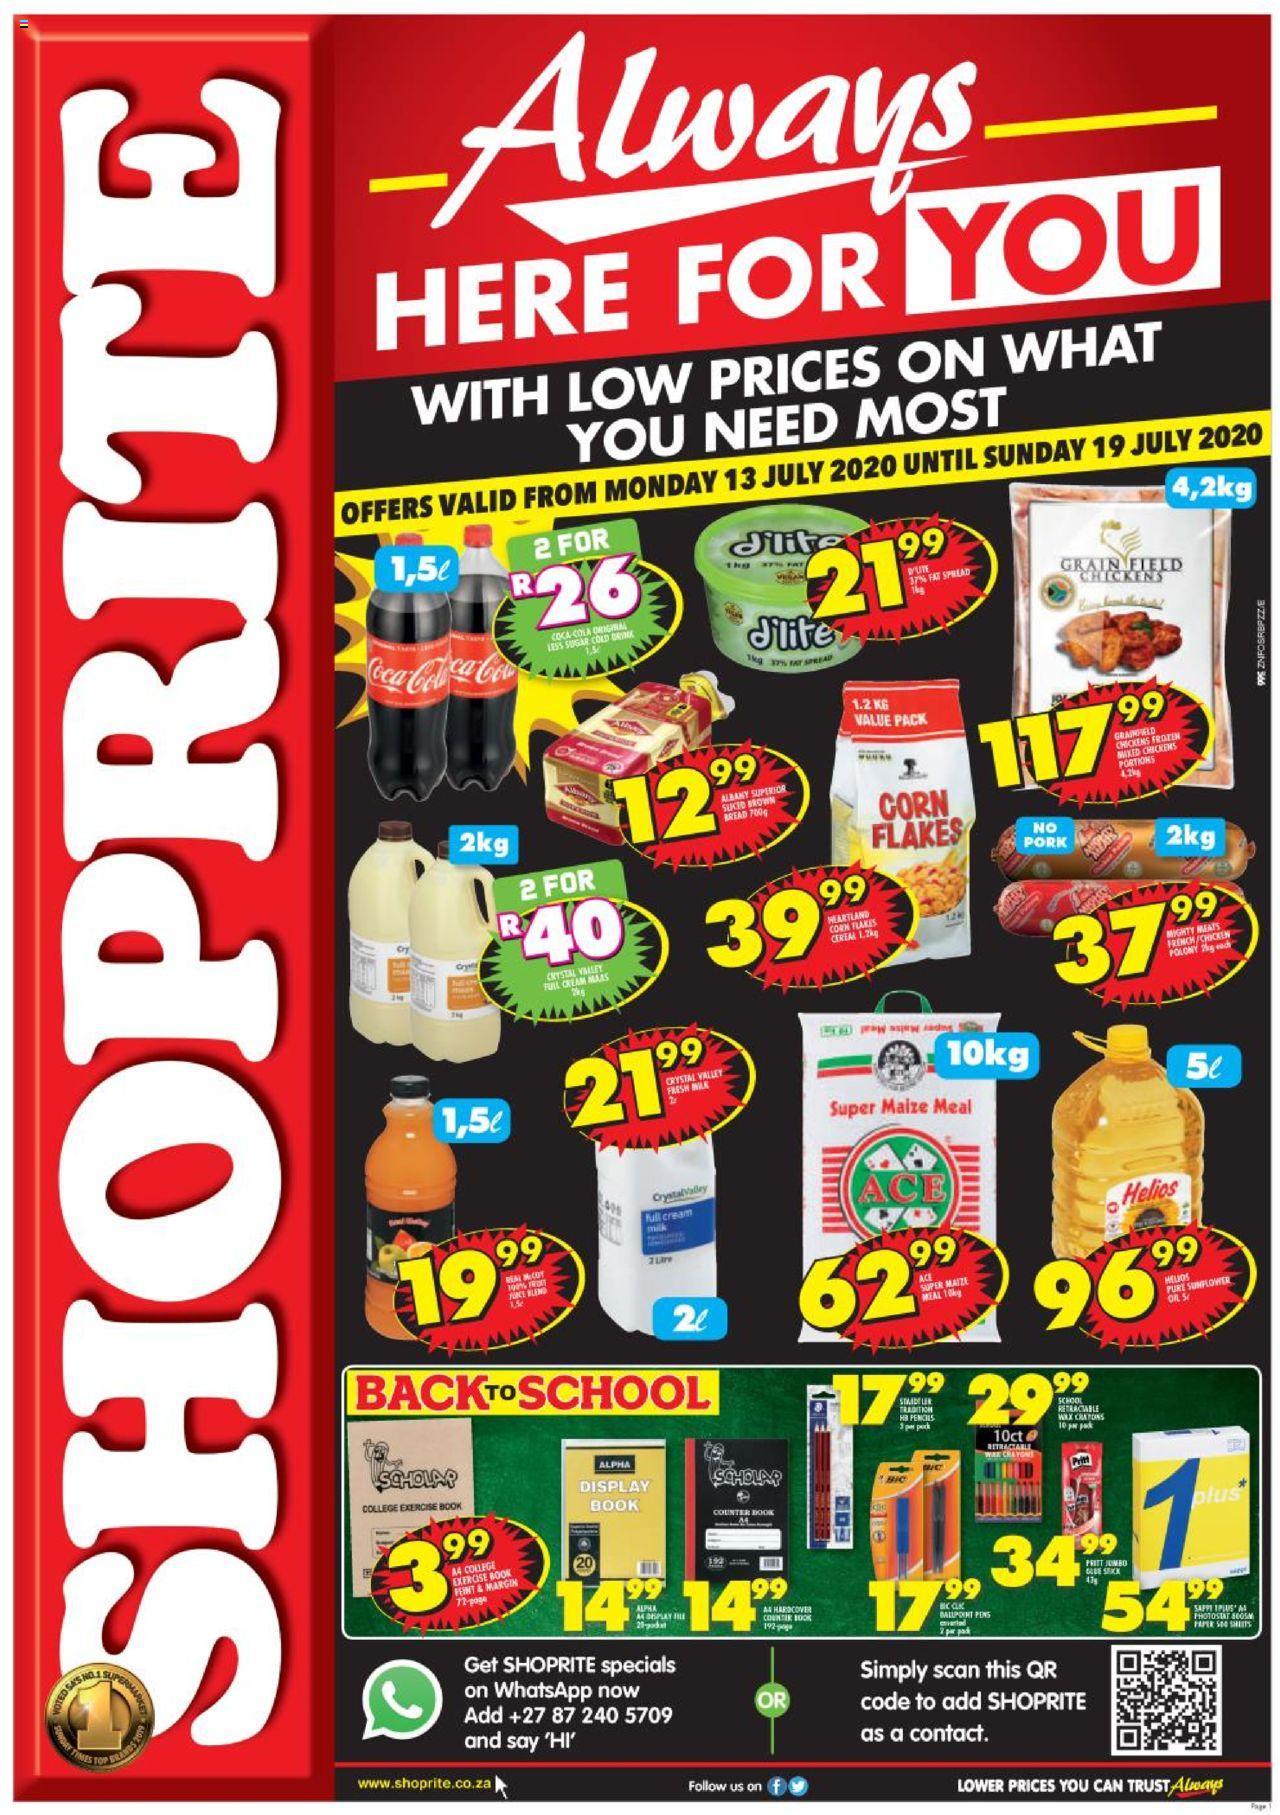 Shoprite Specials Always Here For You 13 July 2020